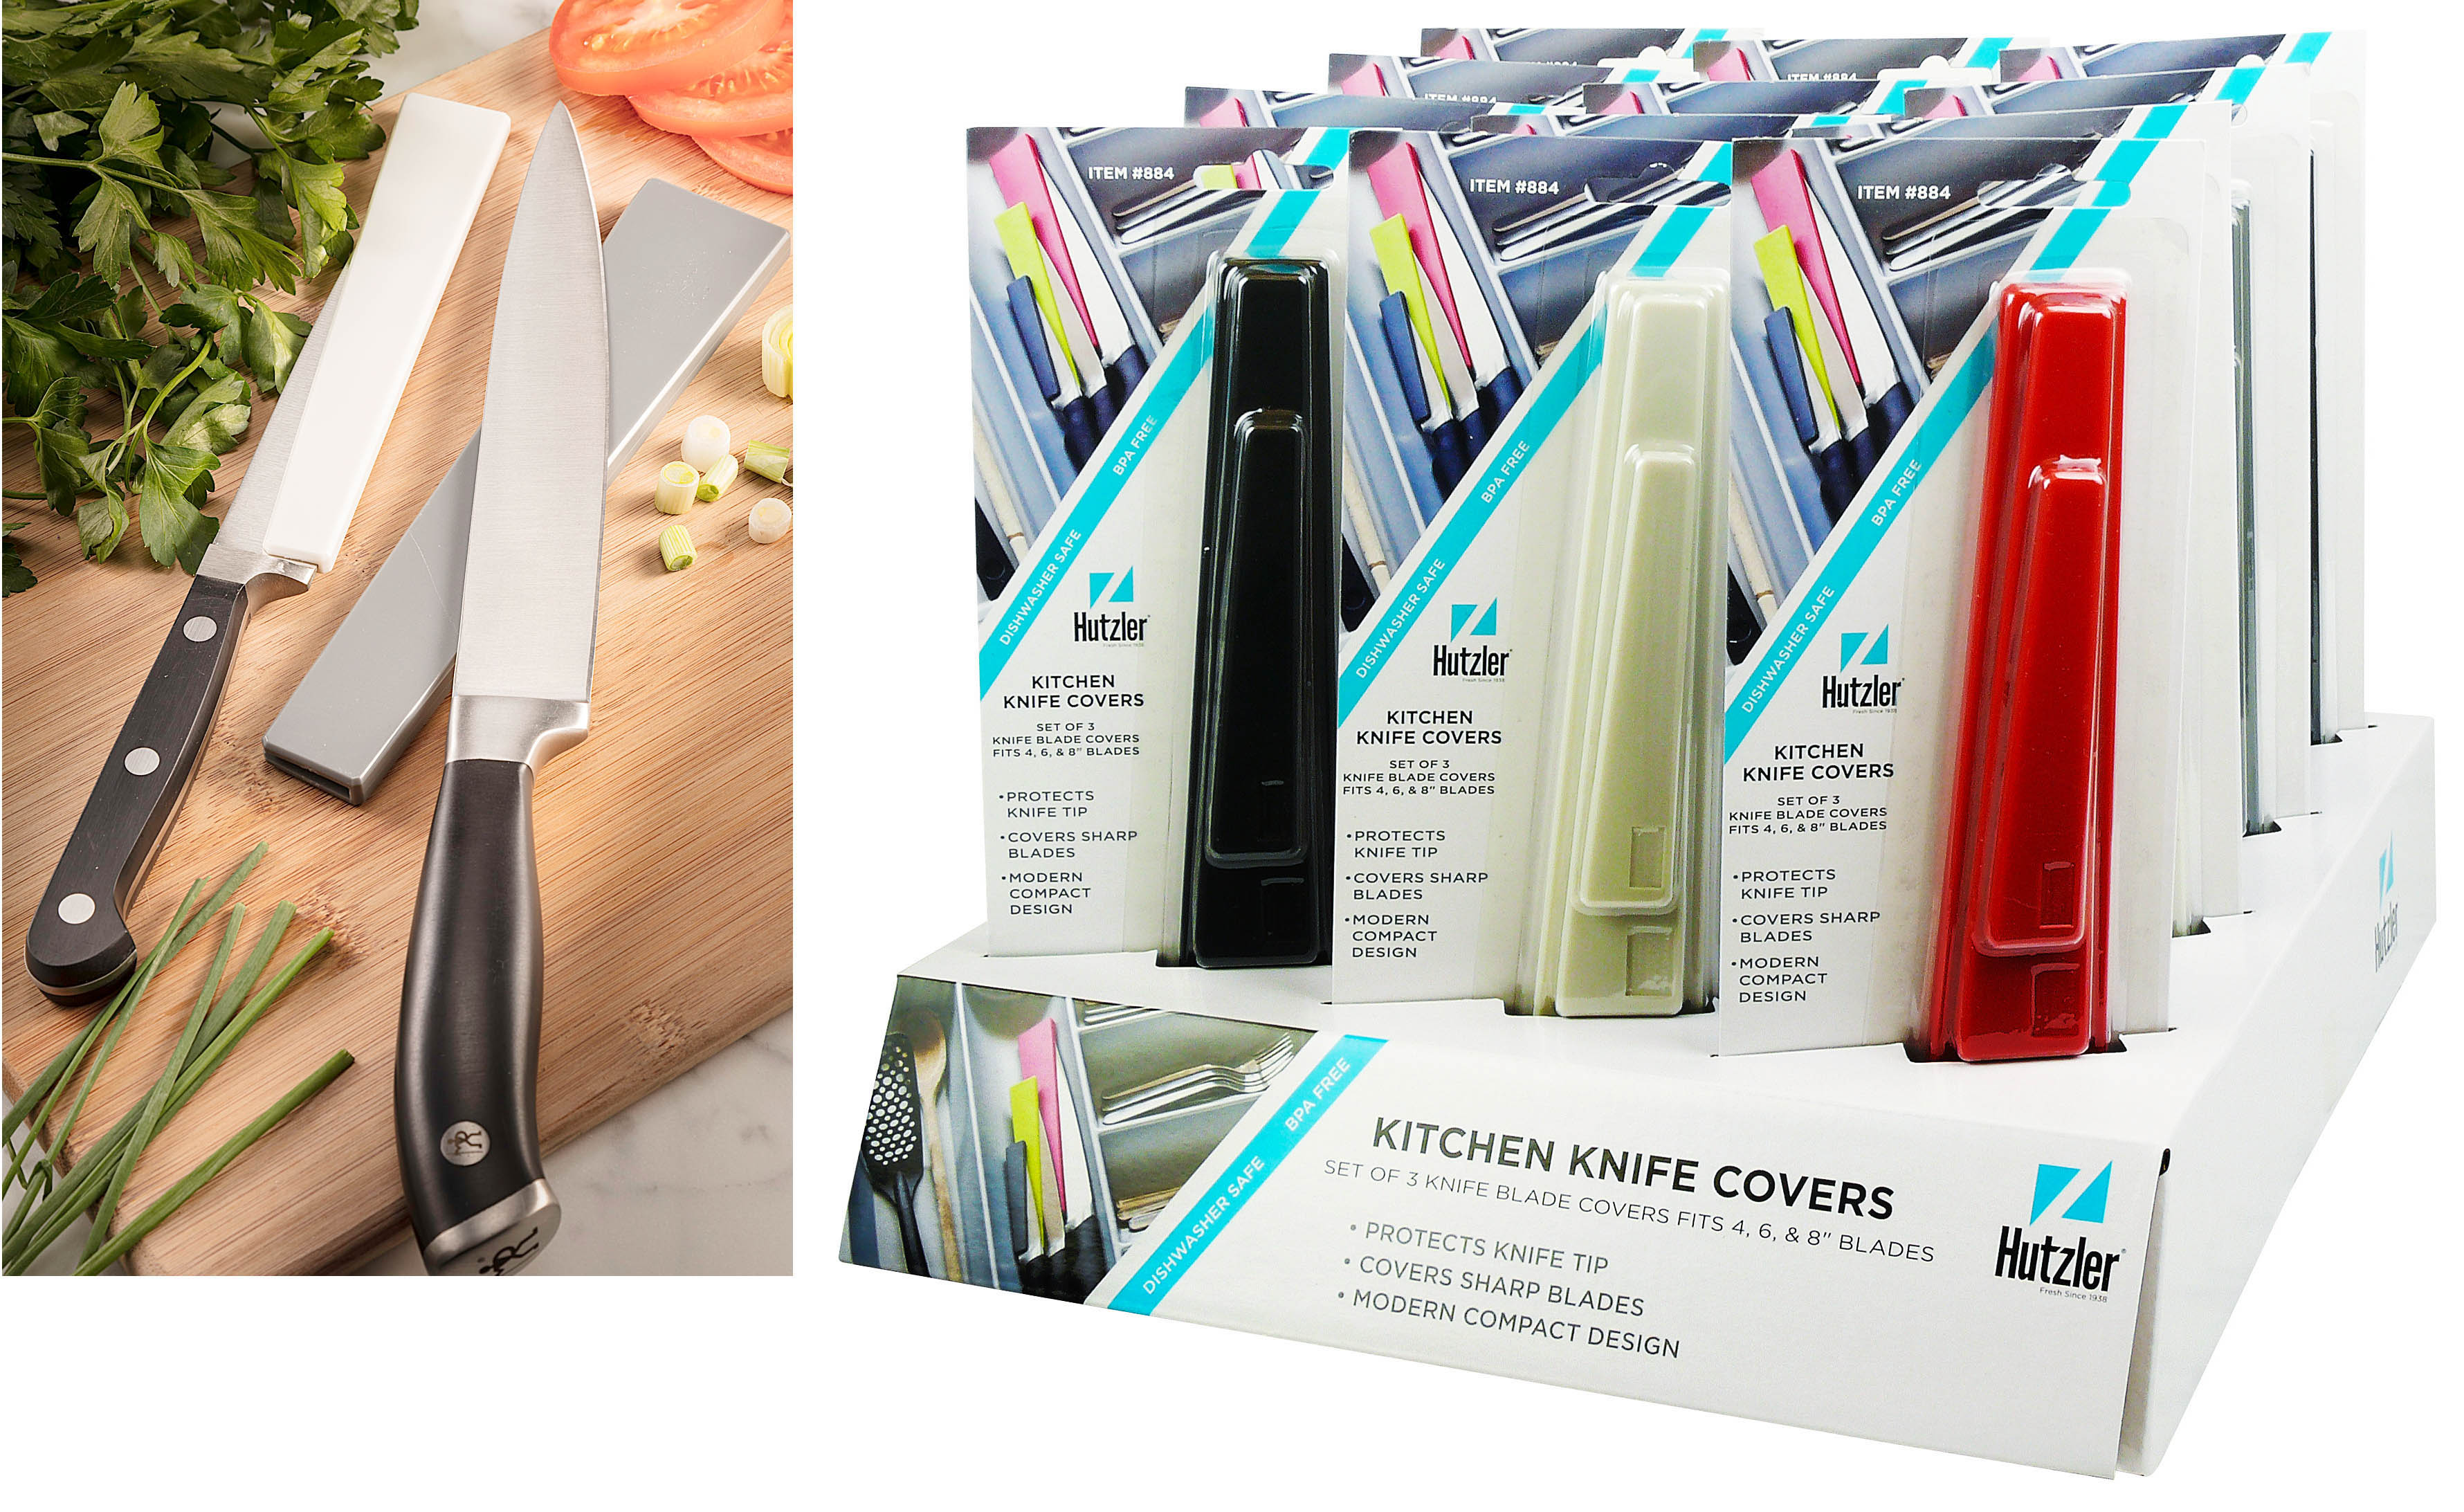 12-884 Kitchen Knife Covers Counter Display (12 Pack)